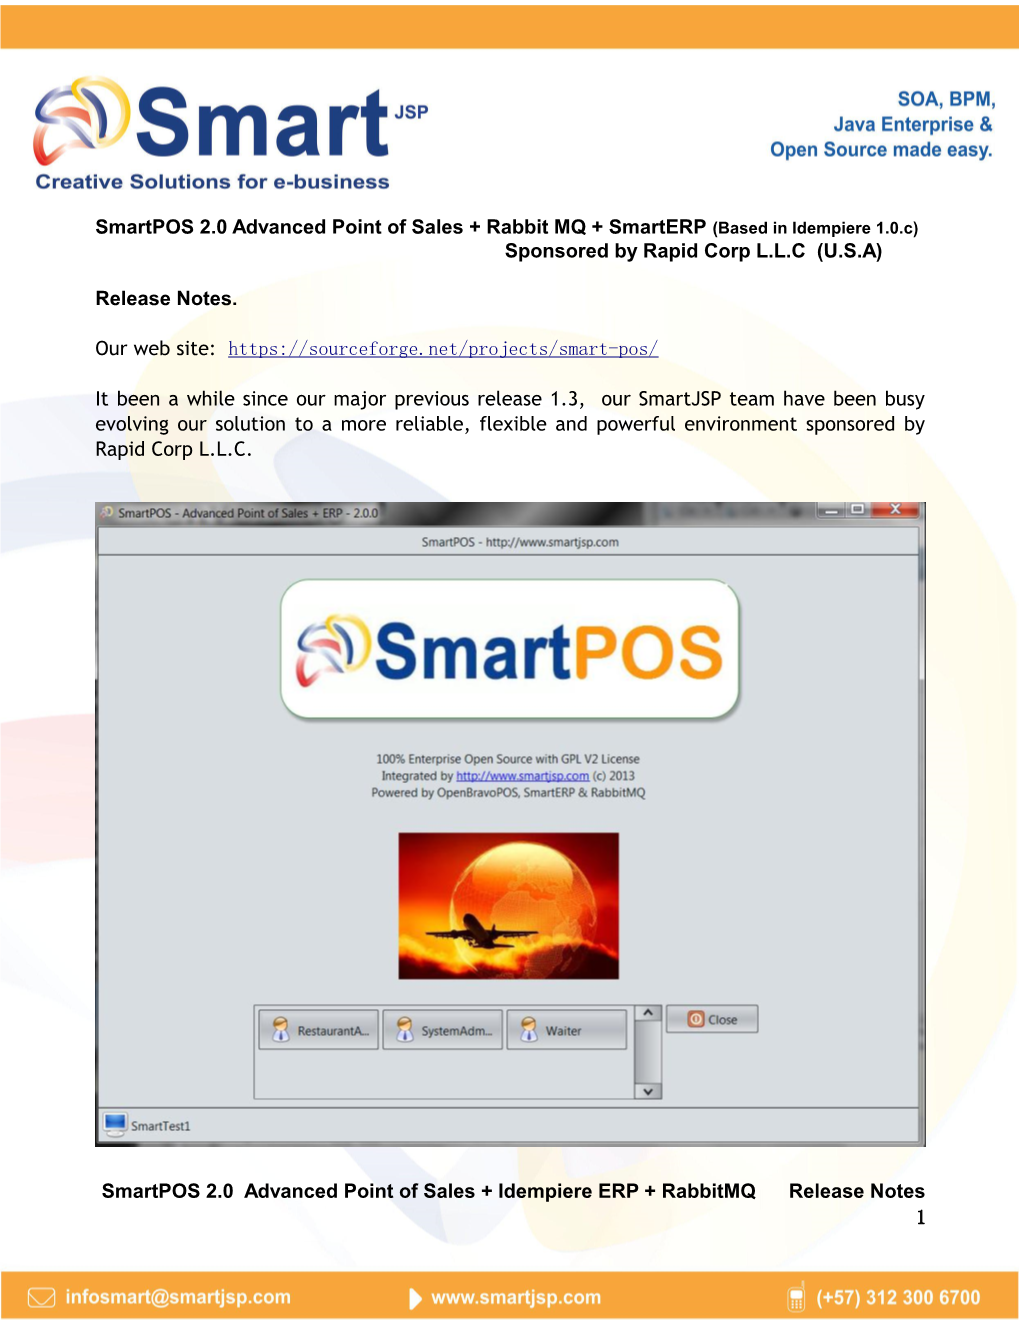 Smartpos 2.0 Advanced Point of Sales + Rabbit MQ + Smarterp (Based in Idempiere 1.0.C) Sponsored by Rapid Corp L.L.C (U.S.A)